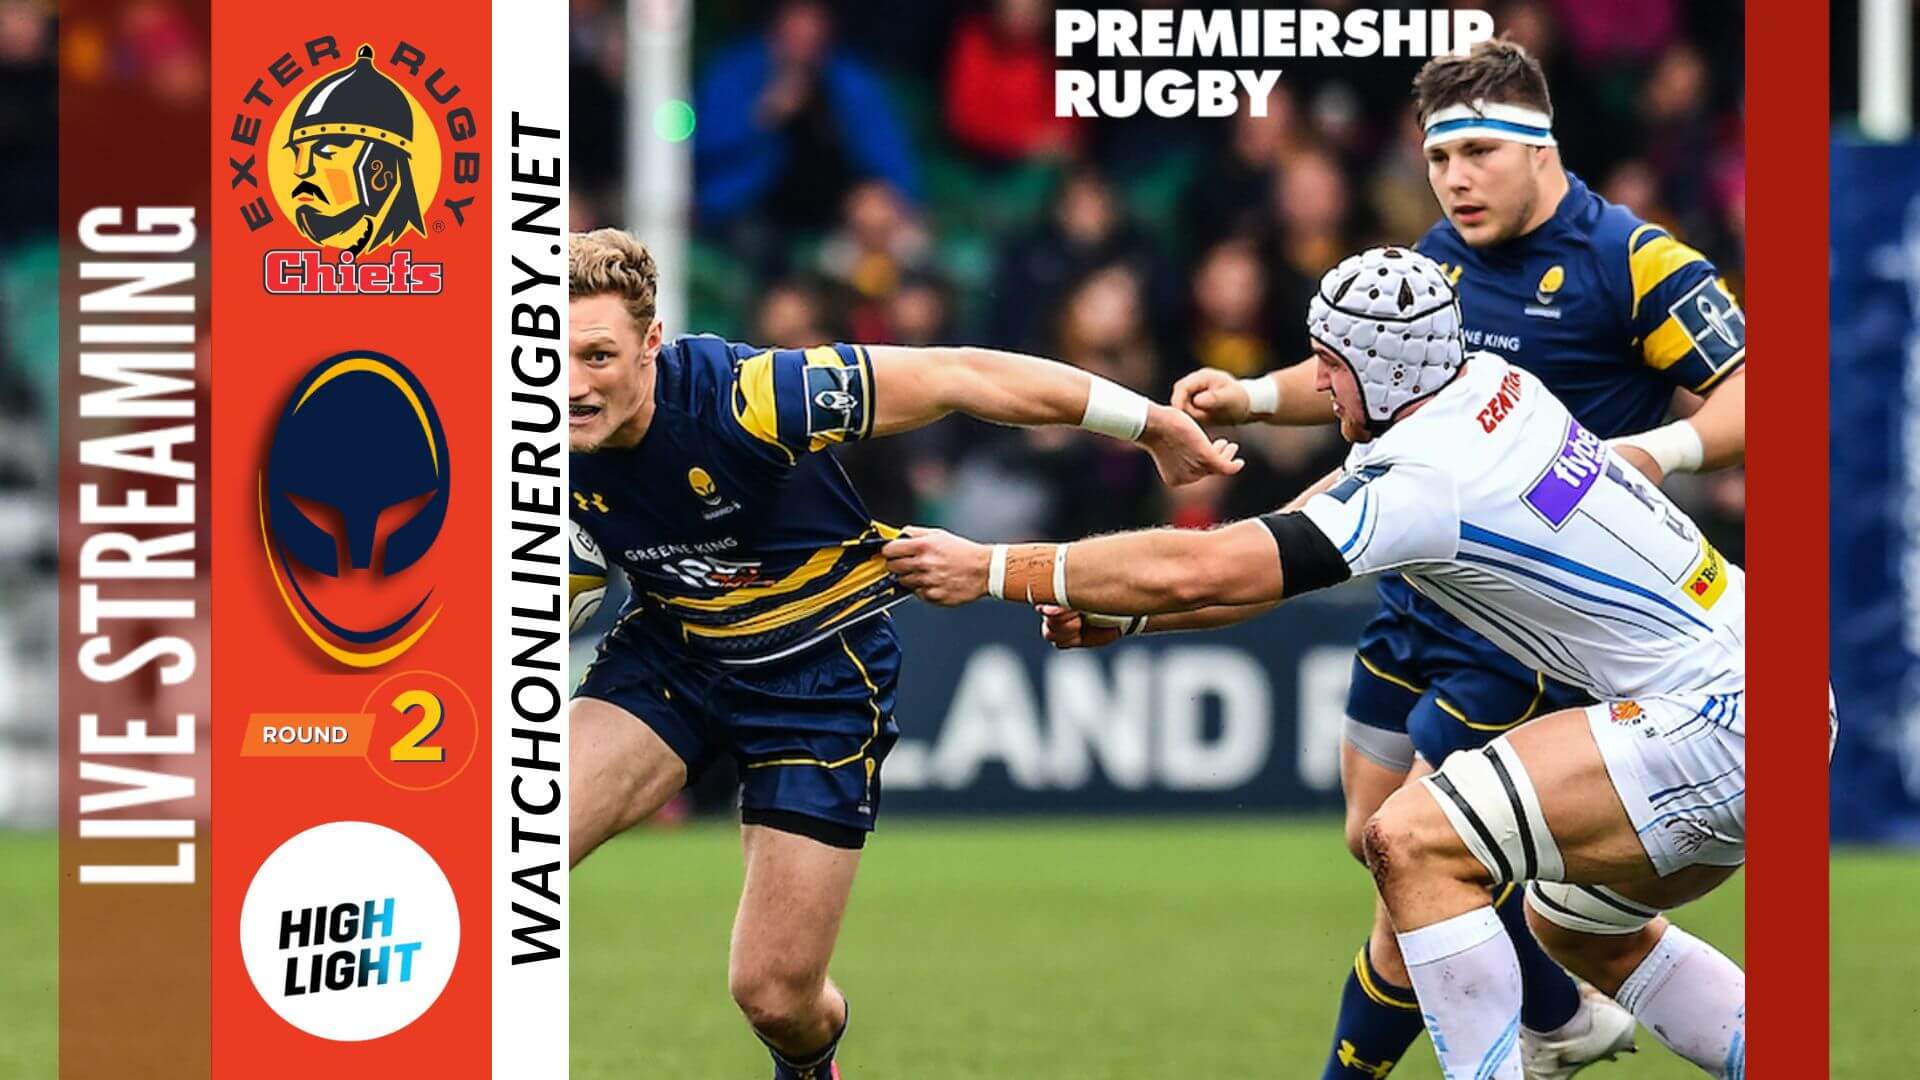 Worcester Warriors Vs Exeter Chiefs Premiership Rugby 2022 RD 2